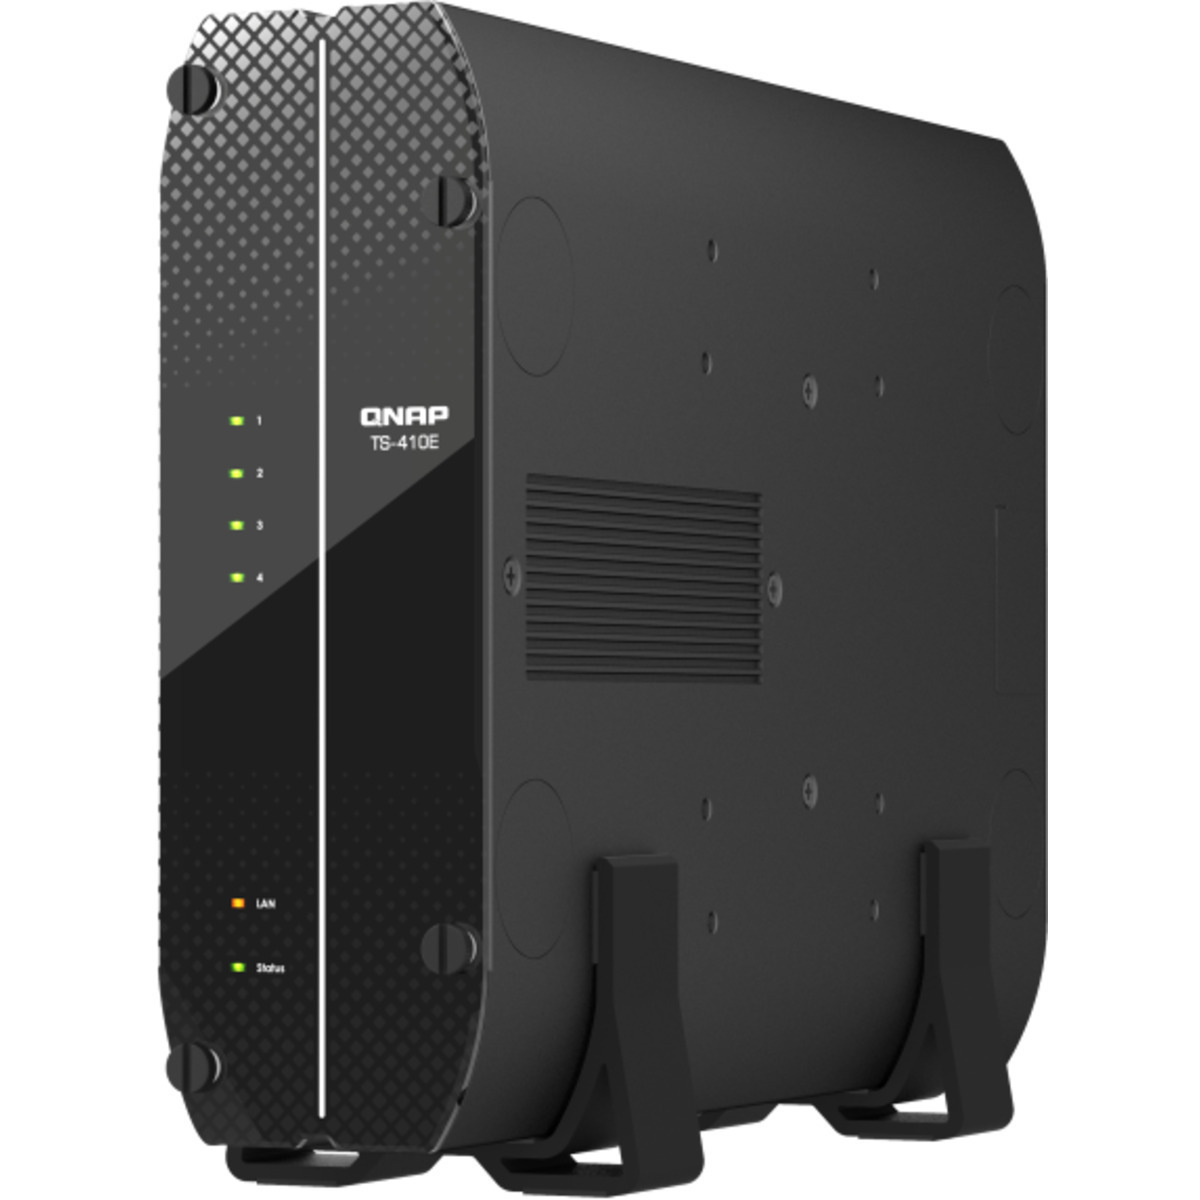 QNAP TS-410E 16tb 4-Bay Desktop Multimedia / Power User / Business NAS - Network Attached Storage Device 4x4tb Crucial MX500 CT4000MX500SSD1 2.5 560/510MB/s SATA 6Gb/s SSD CONSUMER Class Drives Installed - Burn-In Tested TS-410E